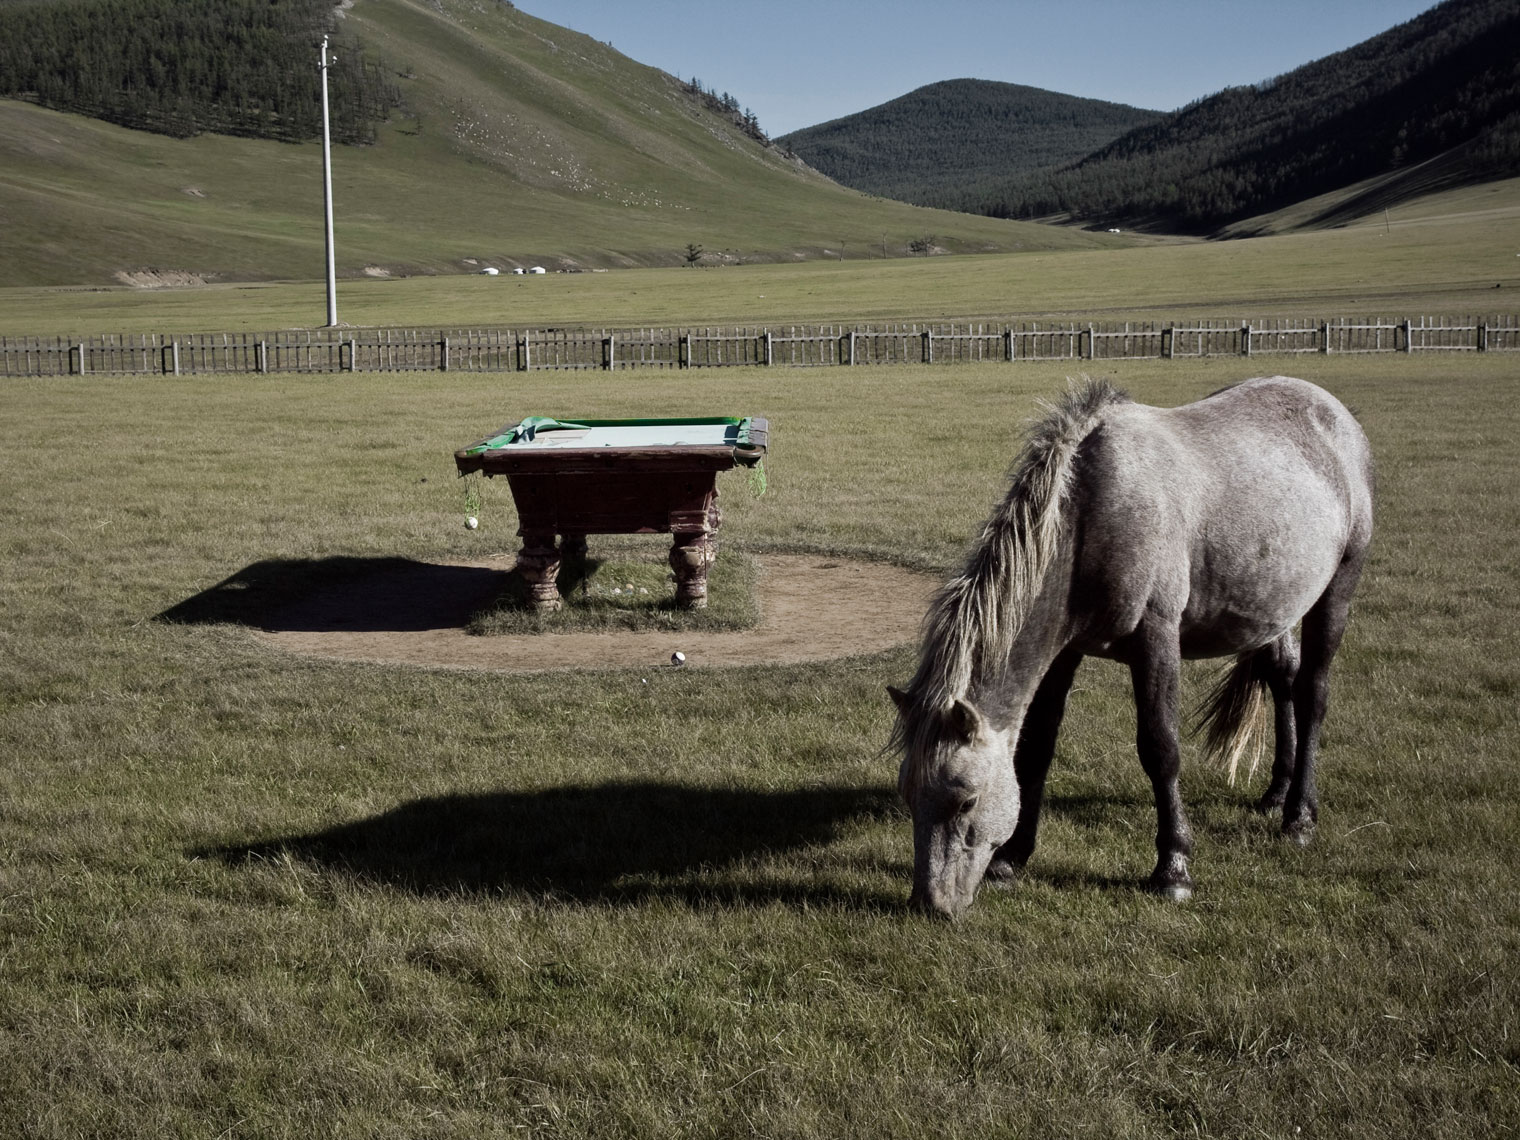 MONGOLIA. Orkhon valley, 2012. The horse and the pool.